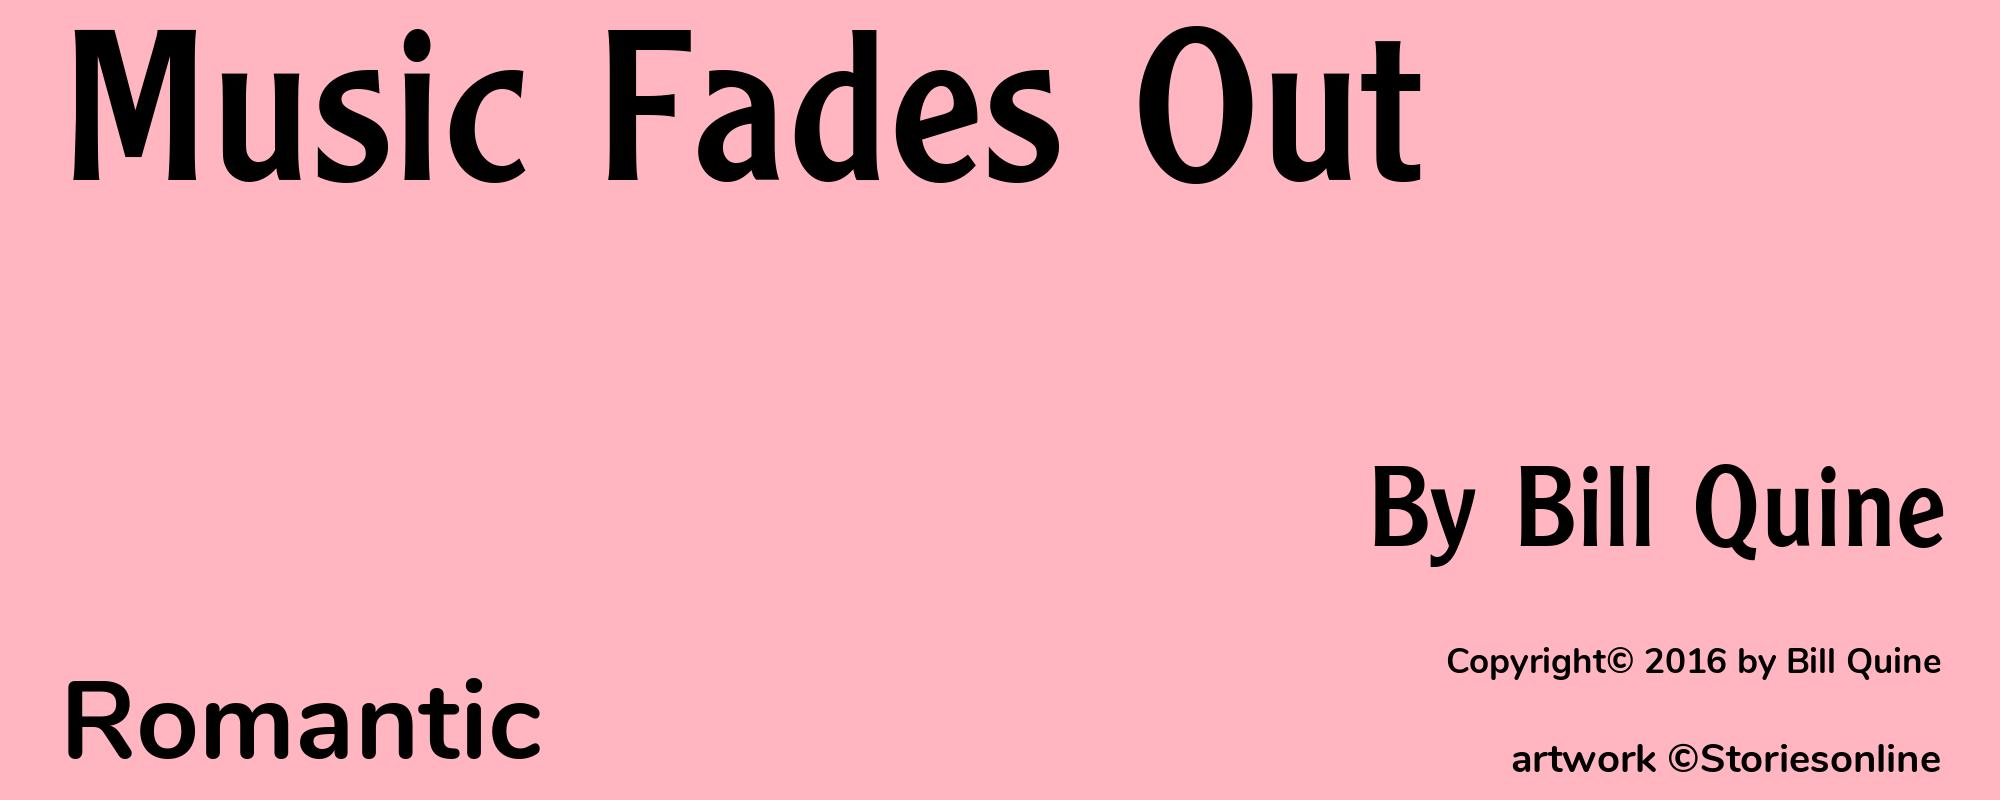 Music Fades Out - Cover